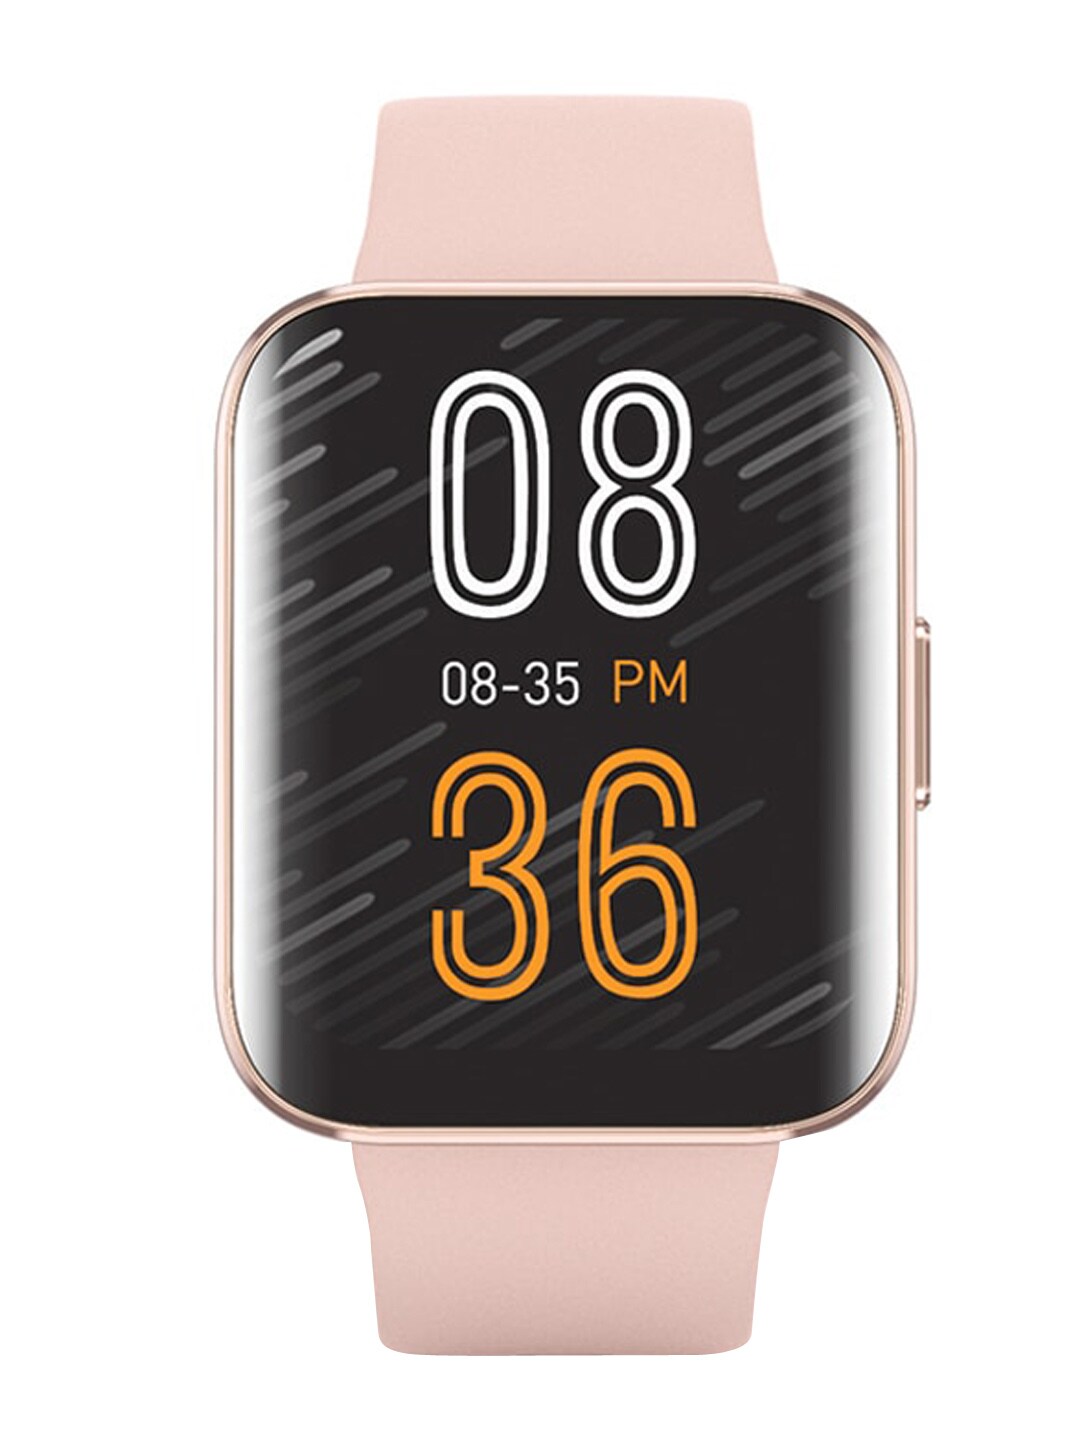 JUST CORSECA STAYFIT J!VE with Dual Curved Screen - Rose Gold Price in India